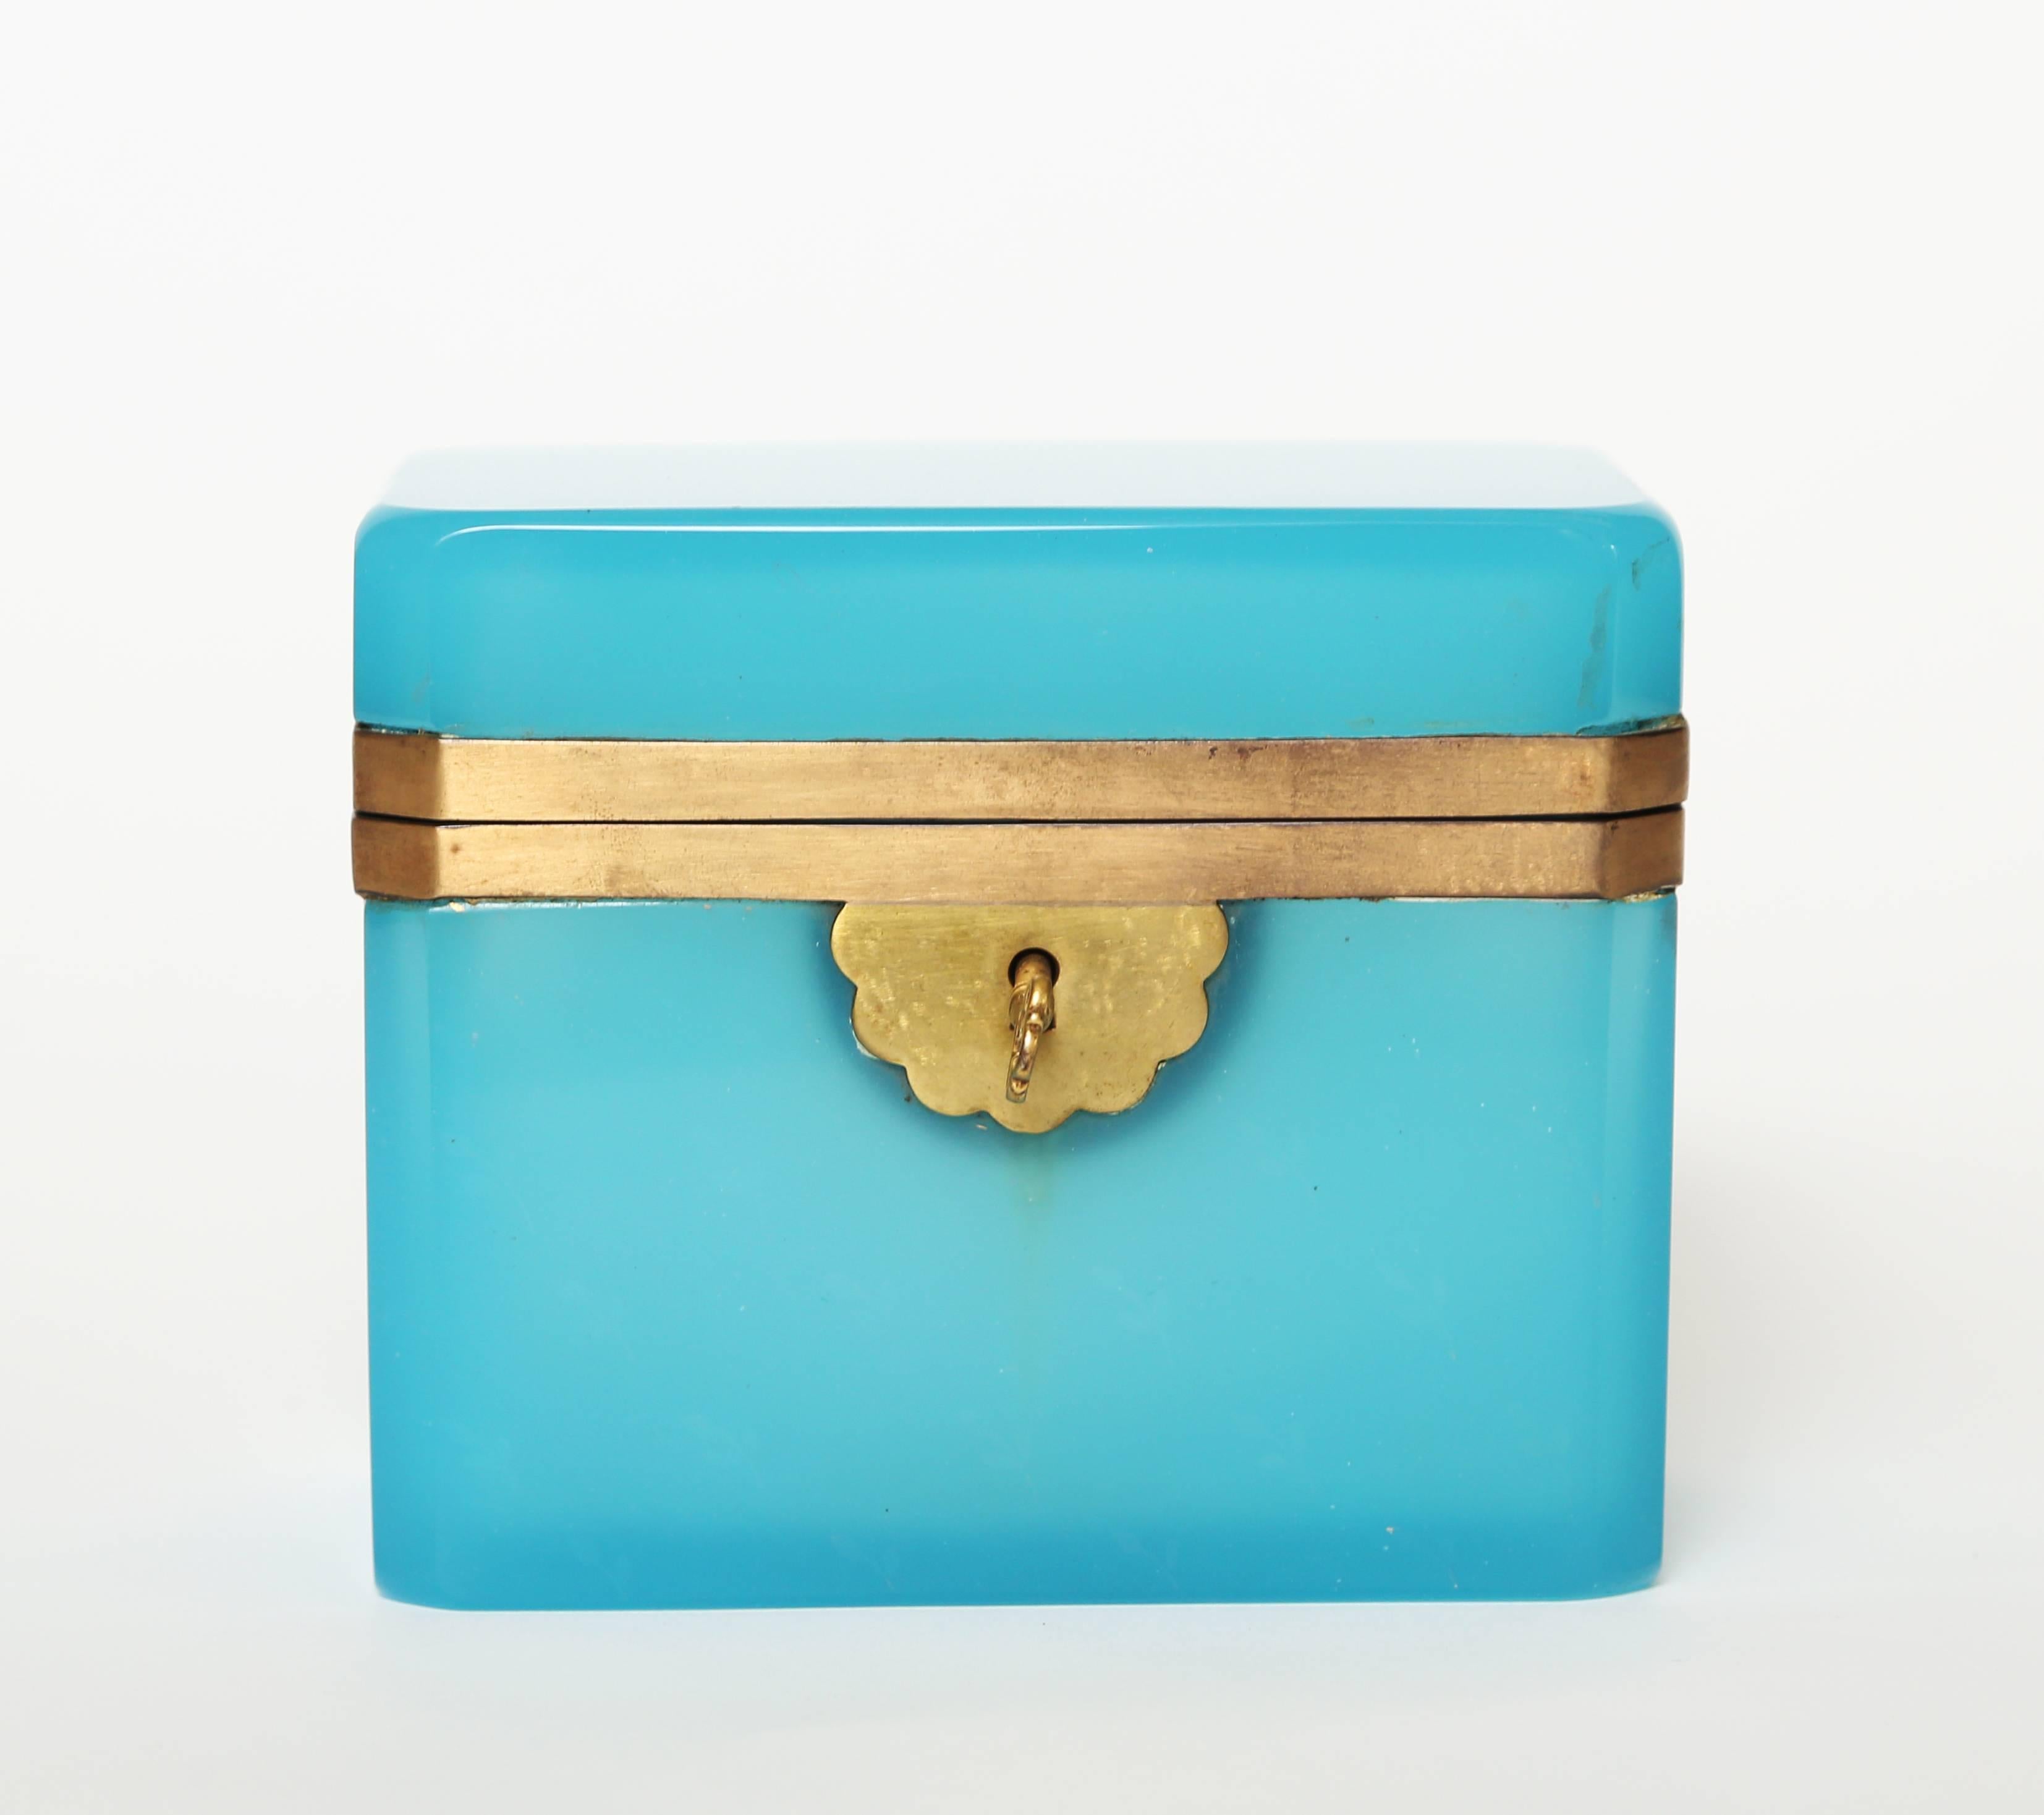 French turquoise glass hinged box with gilt brass frame and original gilt key. This box or coffer has remained in pristine condition.